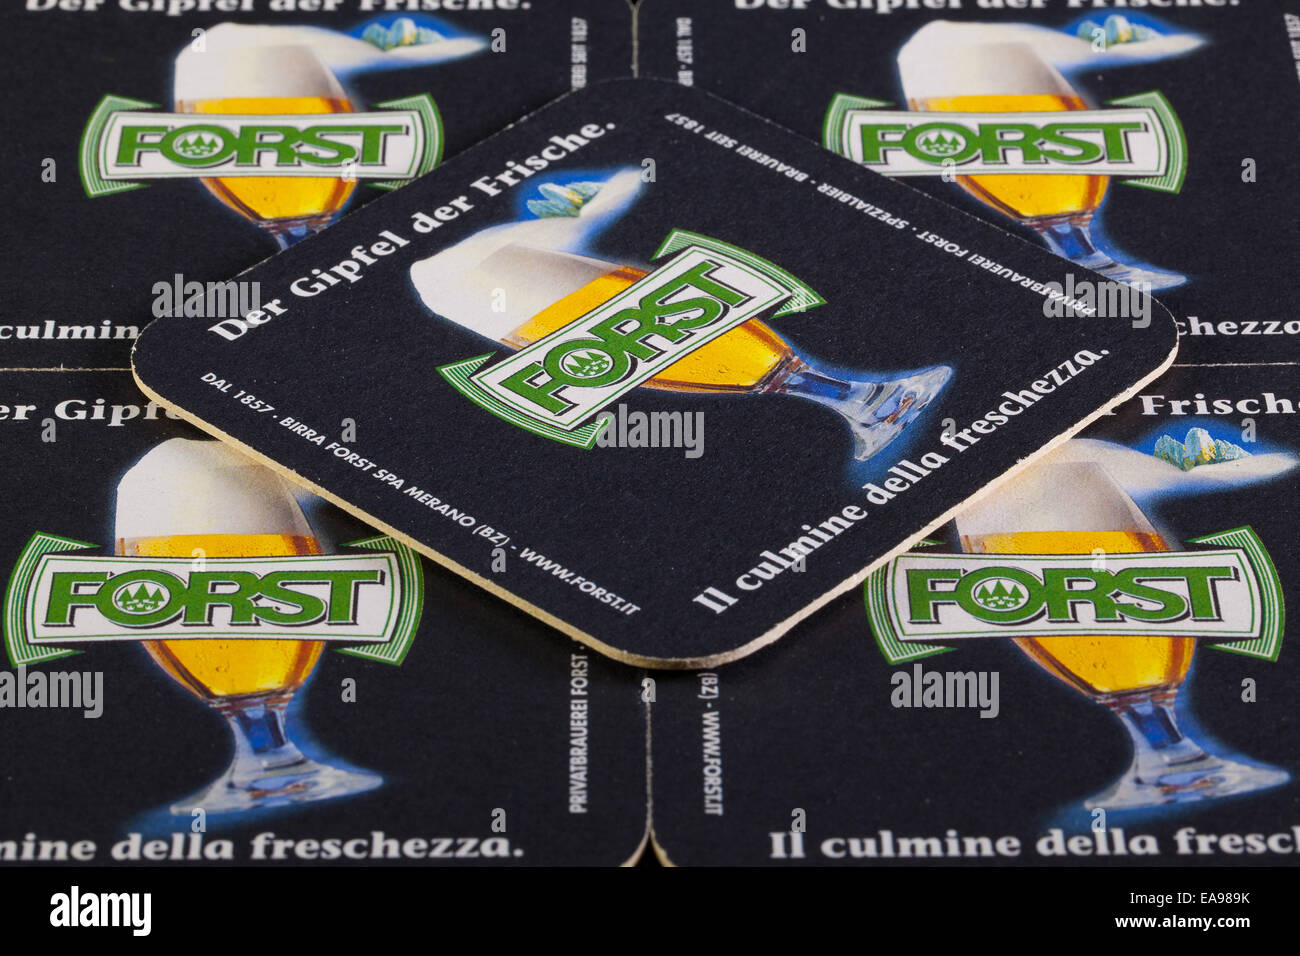 GERMANY,STRASBOURG - November 9, 2014: Beermats from Forst beer.Forst is an Italian brewing company, based in Forst, a frazione Stock Photo